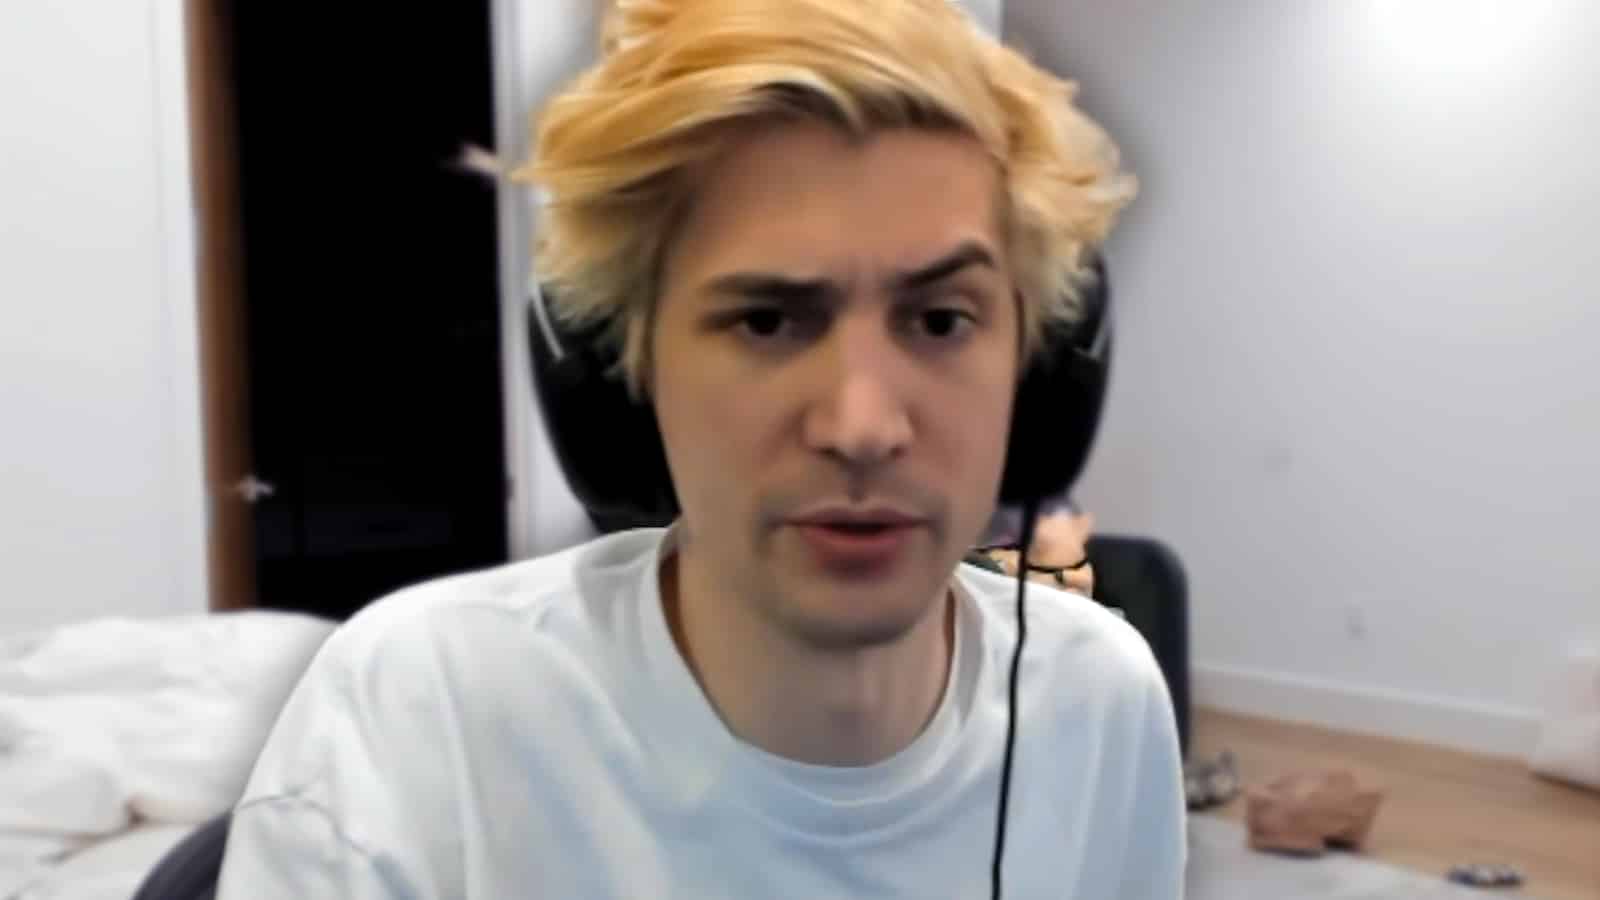 xQc confused on Twitch stream.